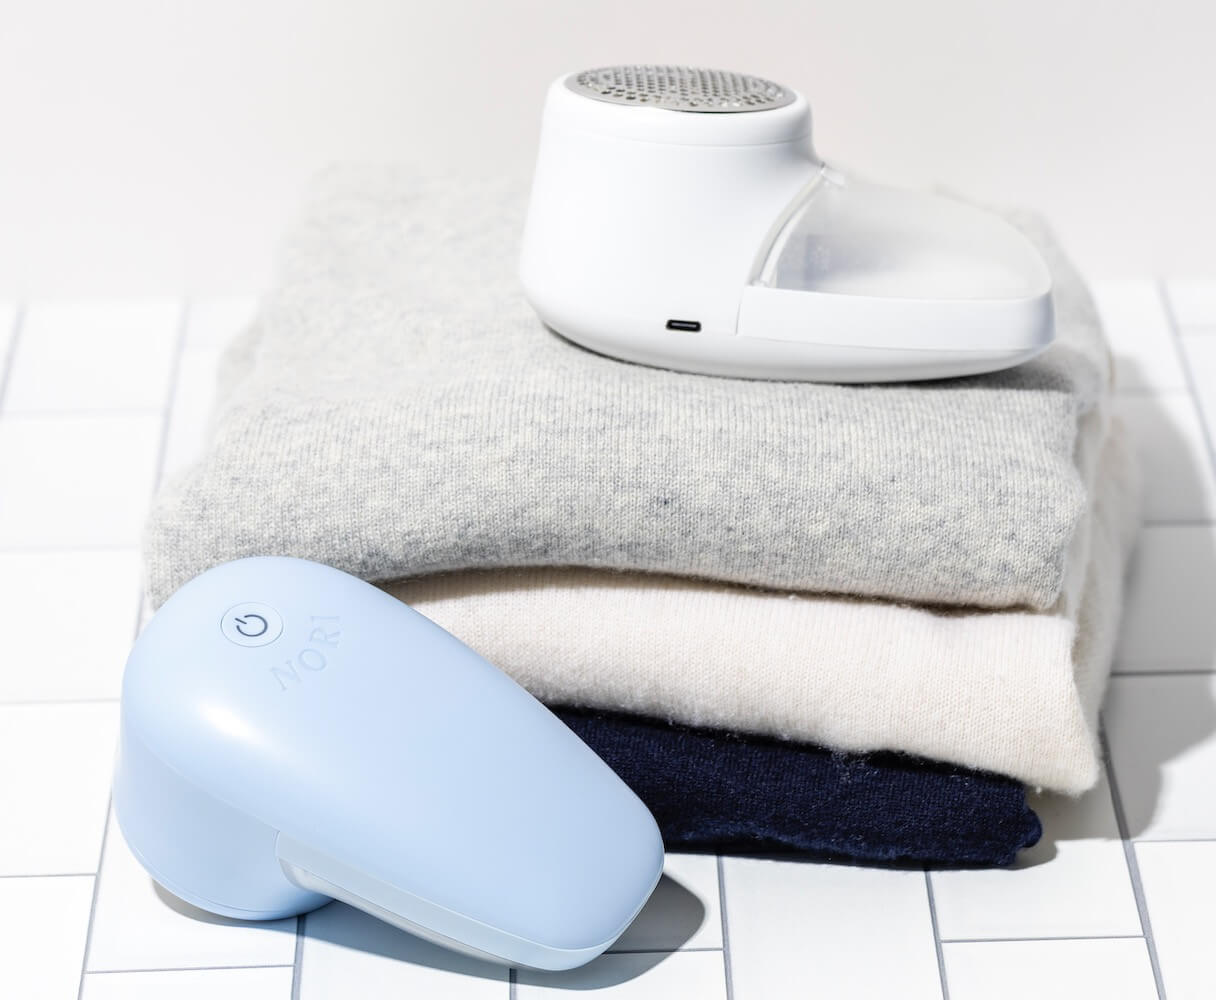 Find the Best Lint Remover for Clothes in 2023 - Reviews & Guide